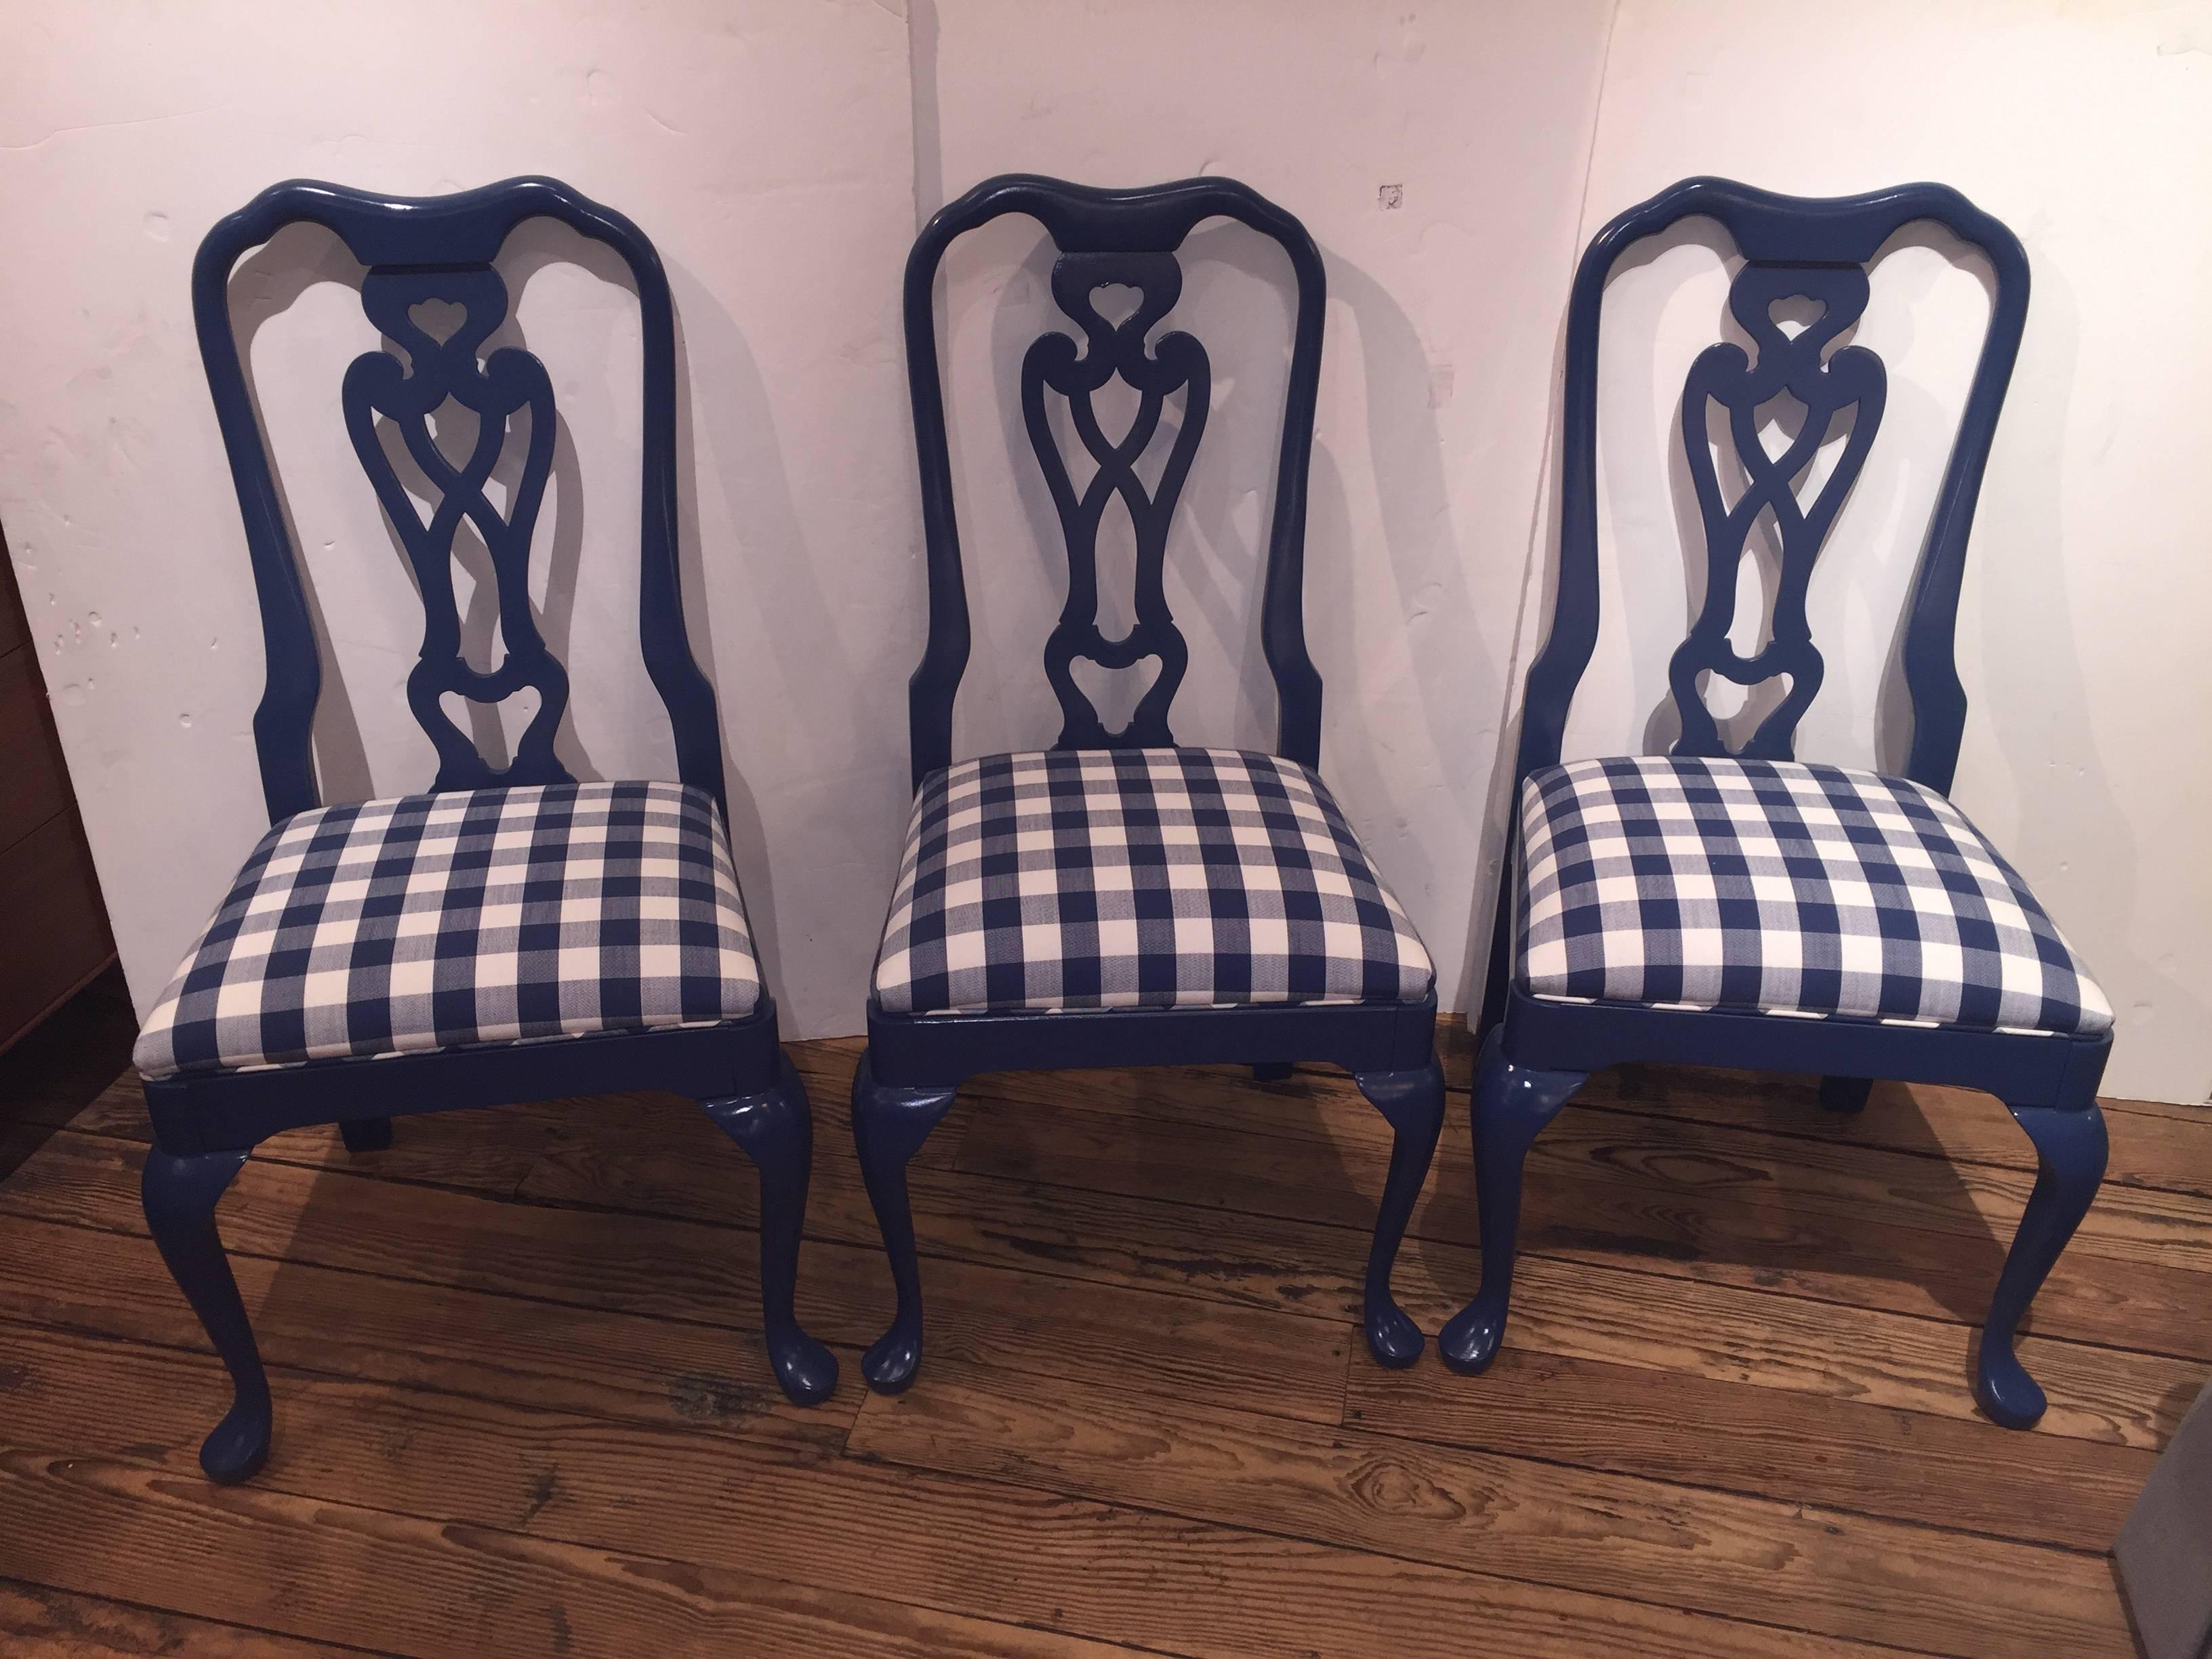 Wood Sensational Set of Six Lacquered and Gingham Upholstered Dining Chairs